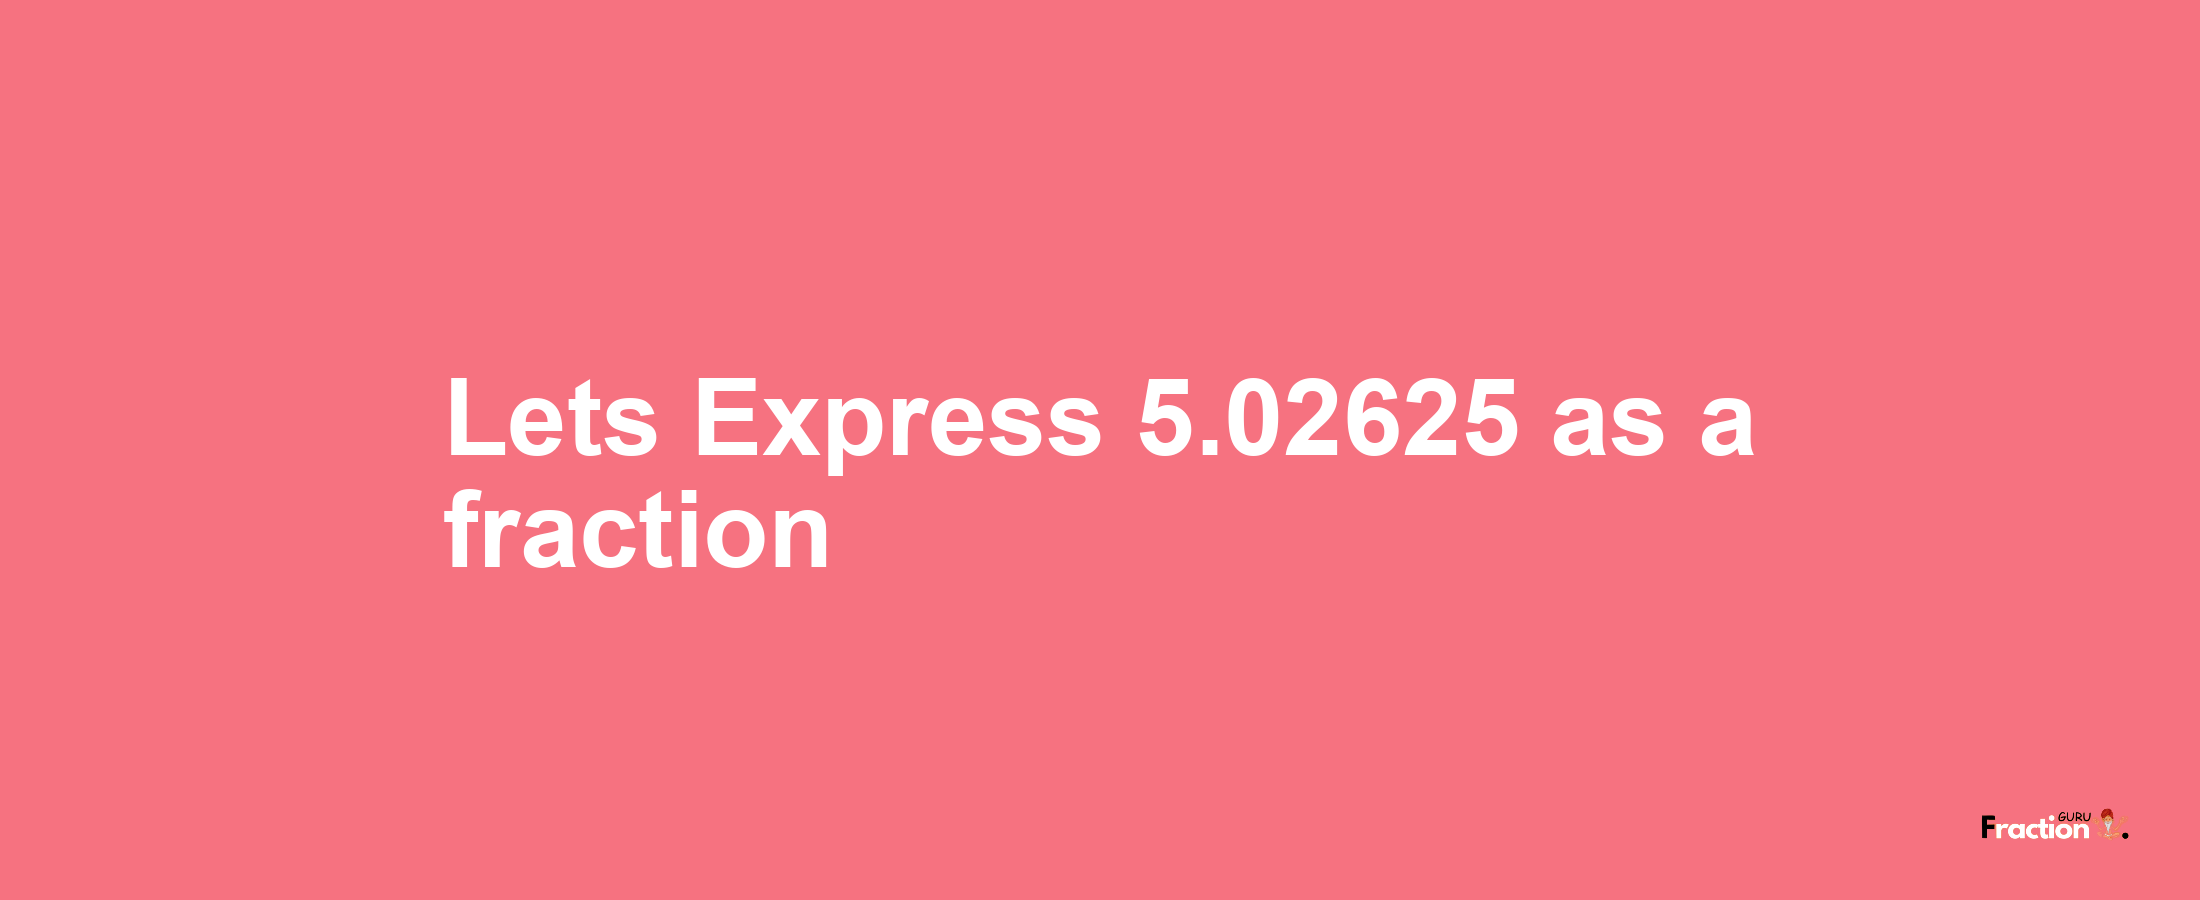 Lets Express 5.02625 as afraction